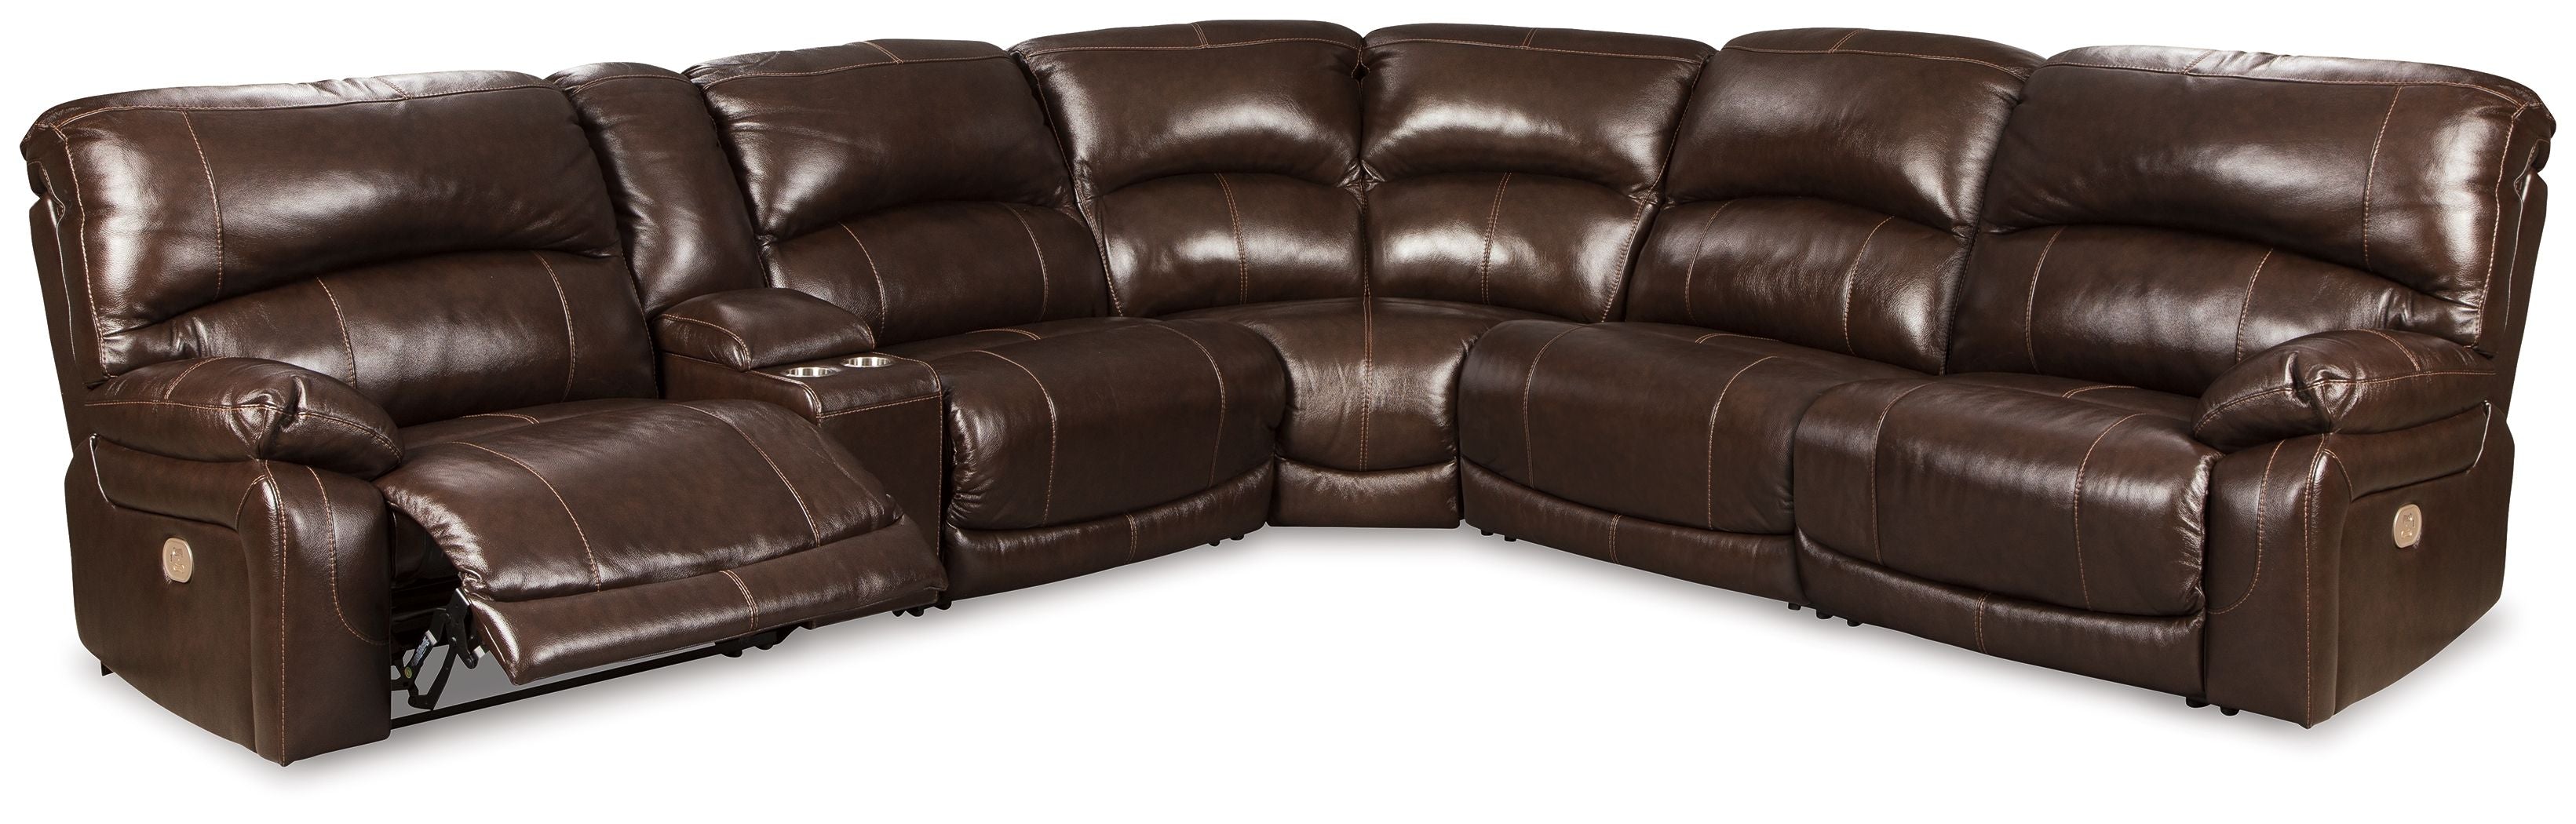 Hallstrung Power Reclining Brown Sectional with Chaise - Plush, USB Charging, Modern